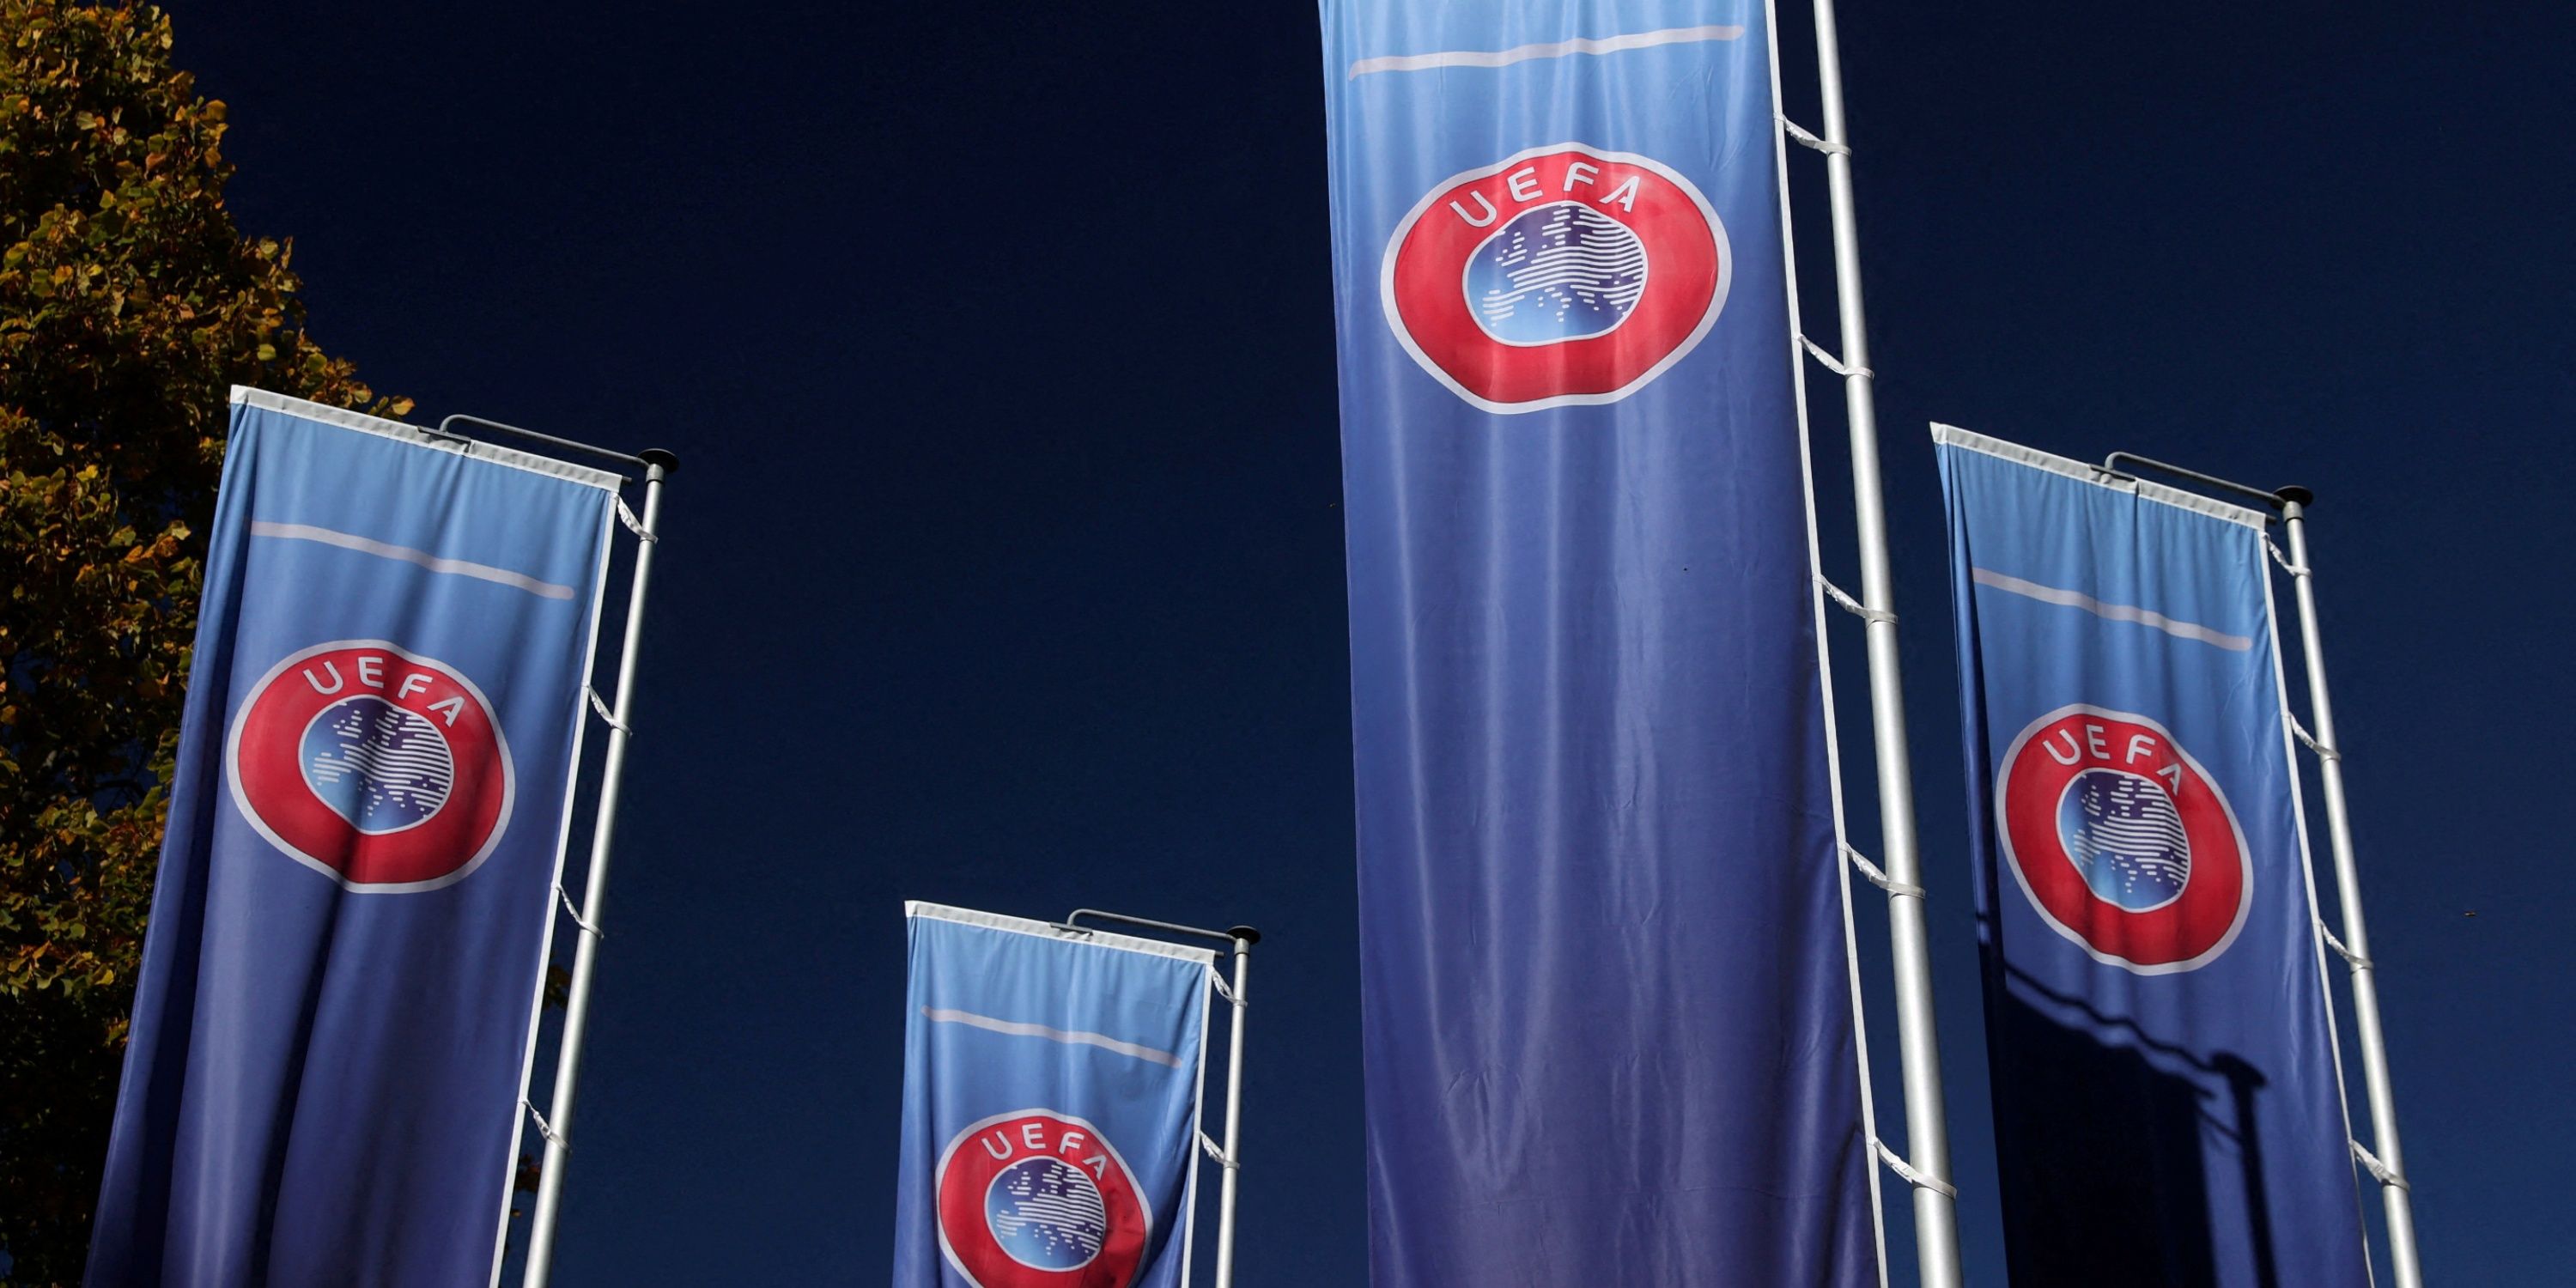 Flags bearing the crest of UEFA, the governing body of European football